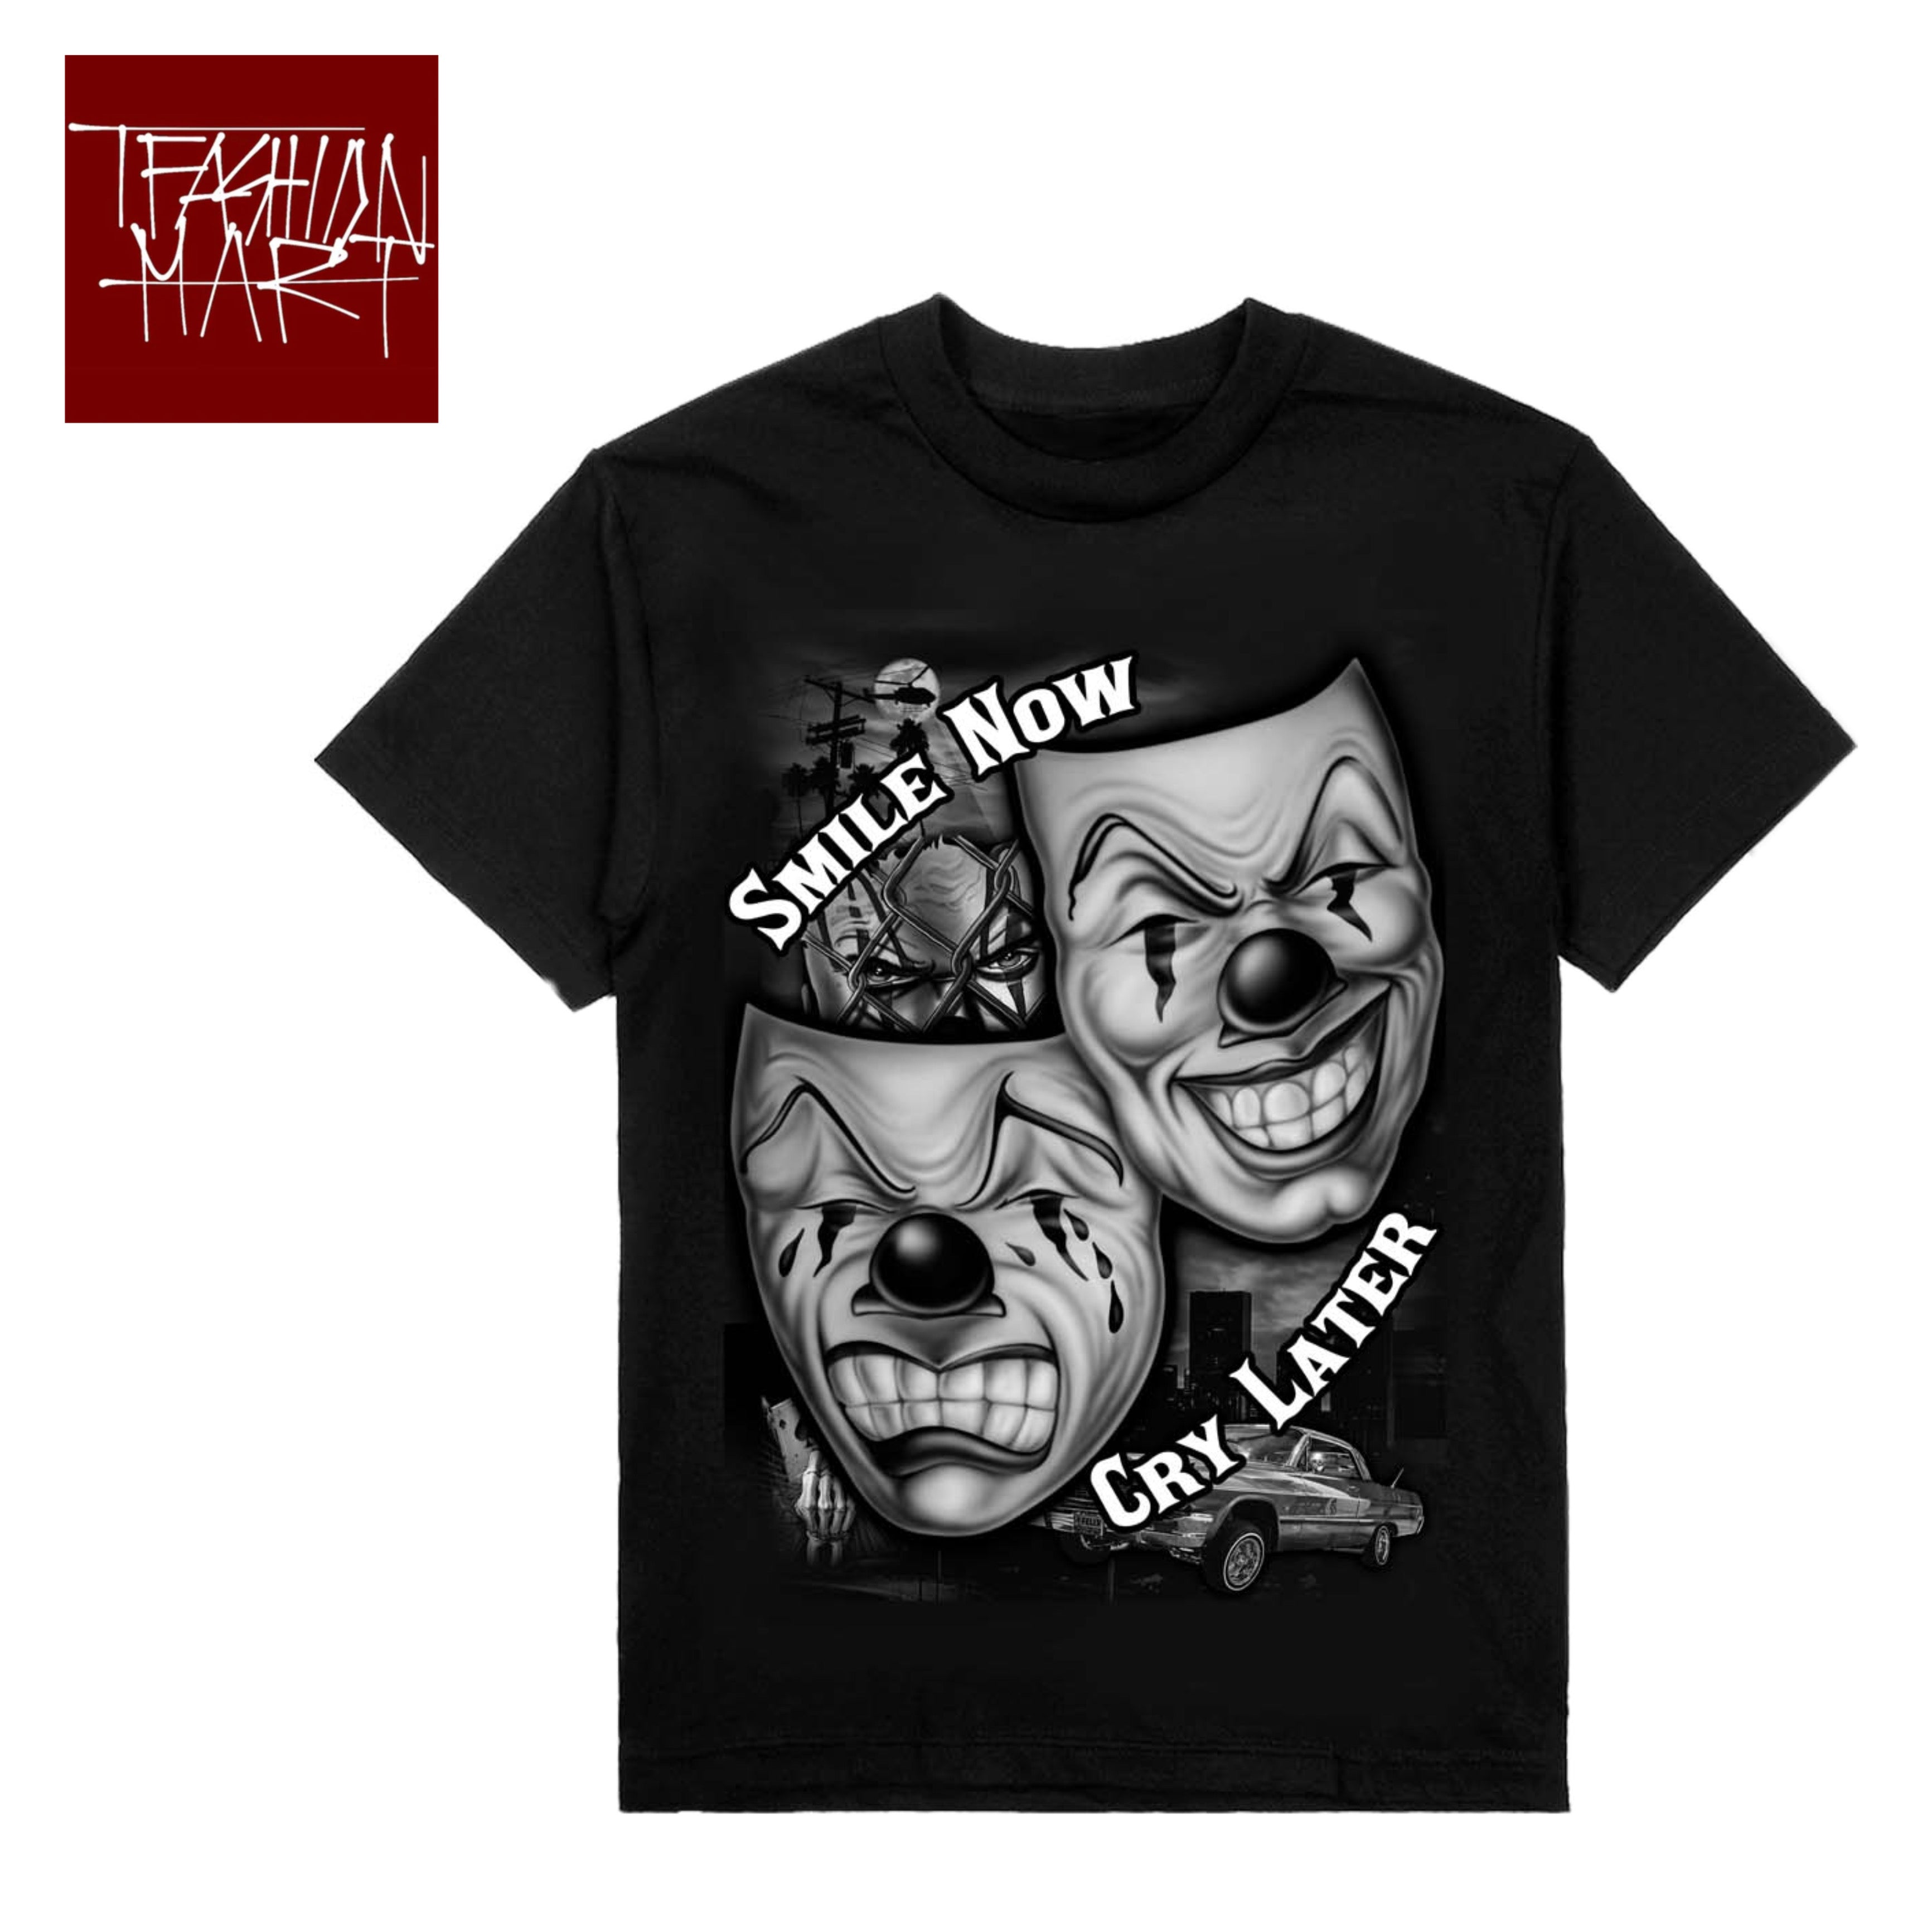 TFashion Graphic Tee - Smile Now Cry Later